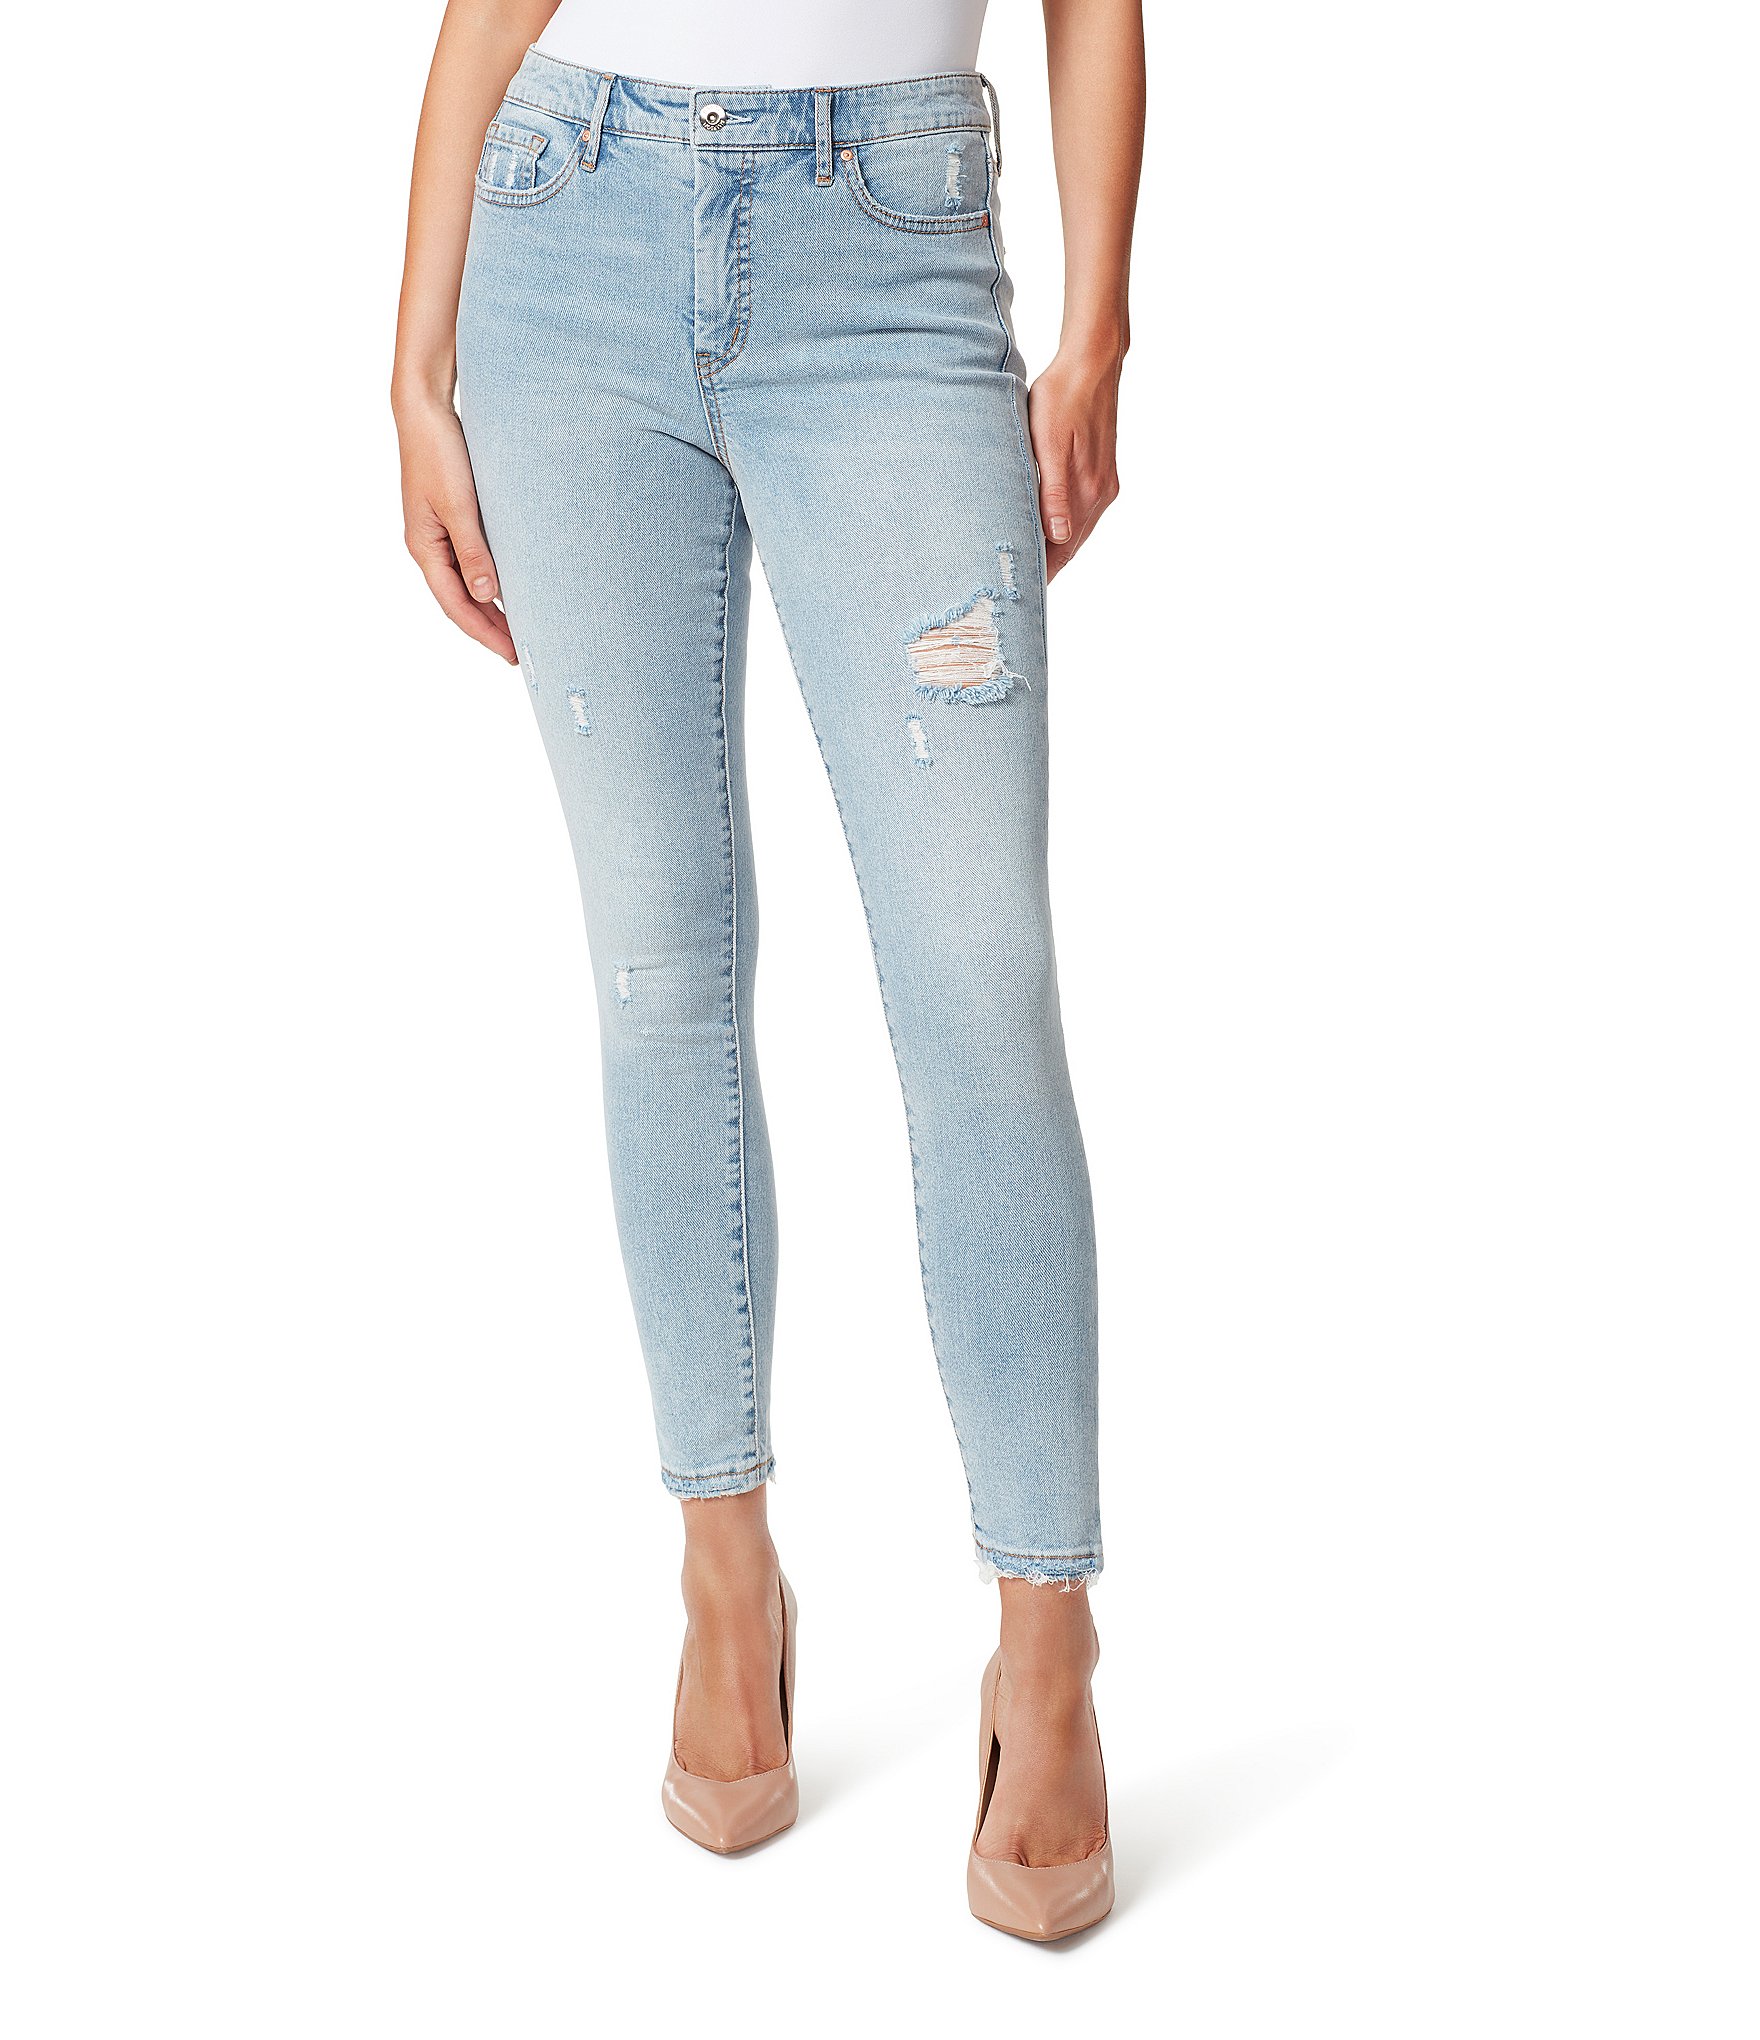 Jessica Simpson Adored High Rise Ankle Skinny Jeans | Dillard's